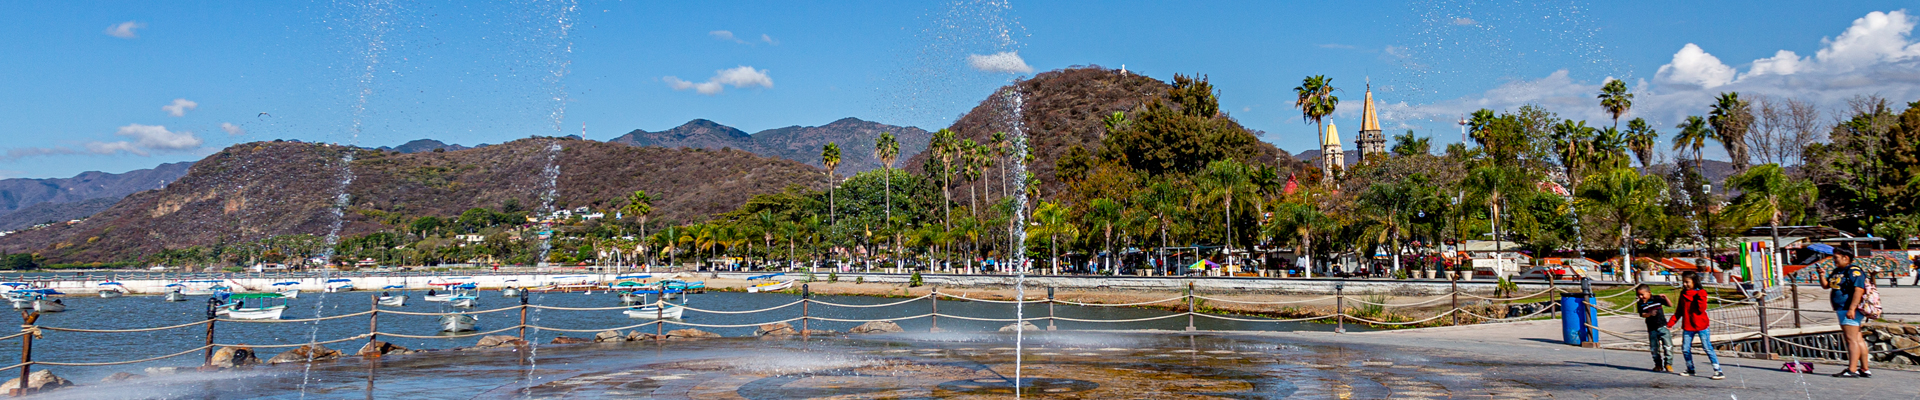 The Lakefront Promenade in Lake Chapala, Mexico